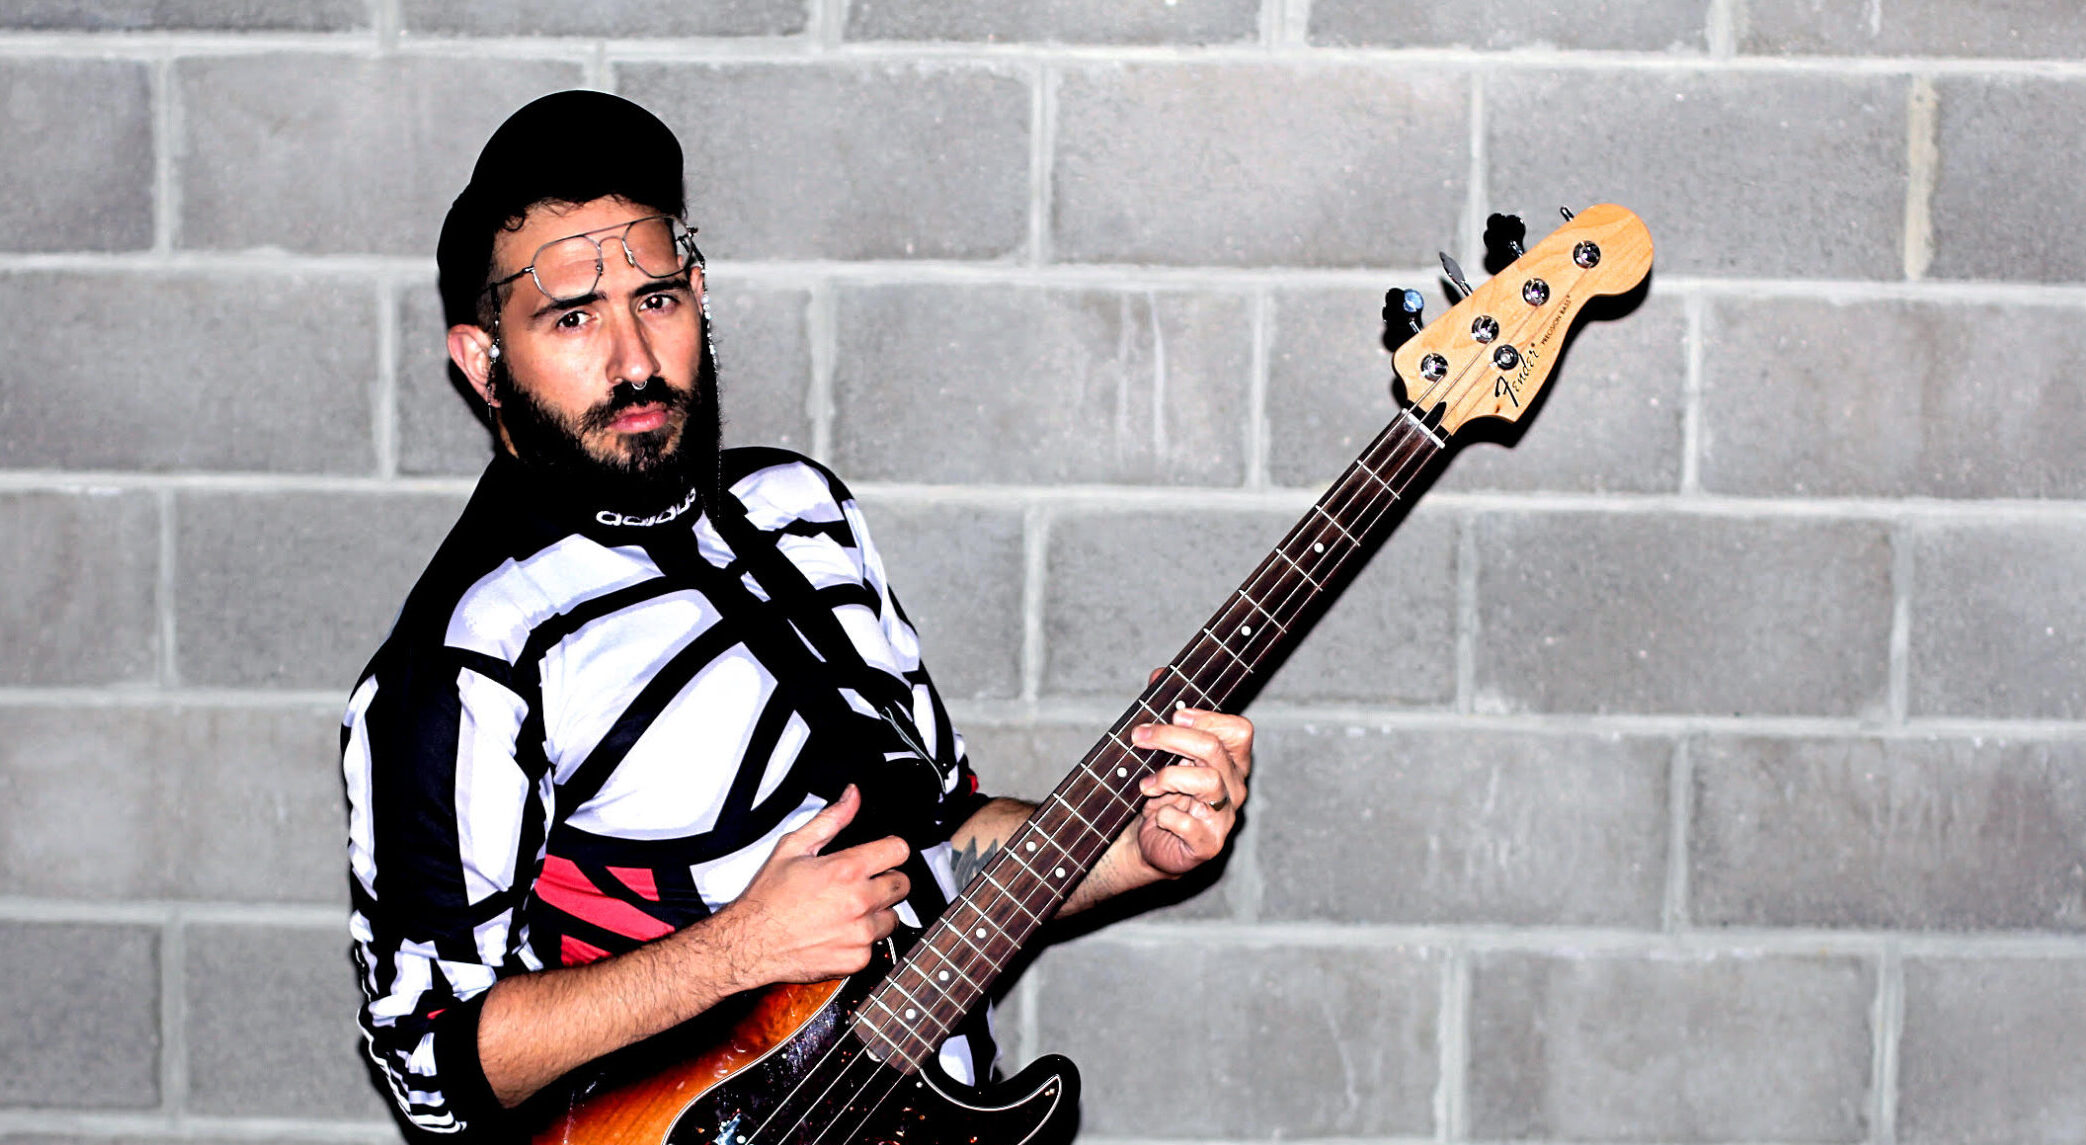 A white person with a dark beard wears glasses, a black baseball cap, a patterned skirt and a black and white sweater. They hold an electric guitar. 